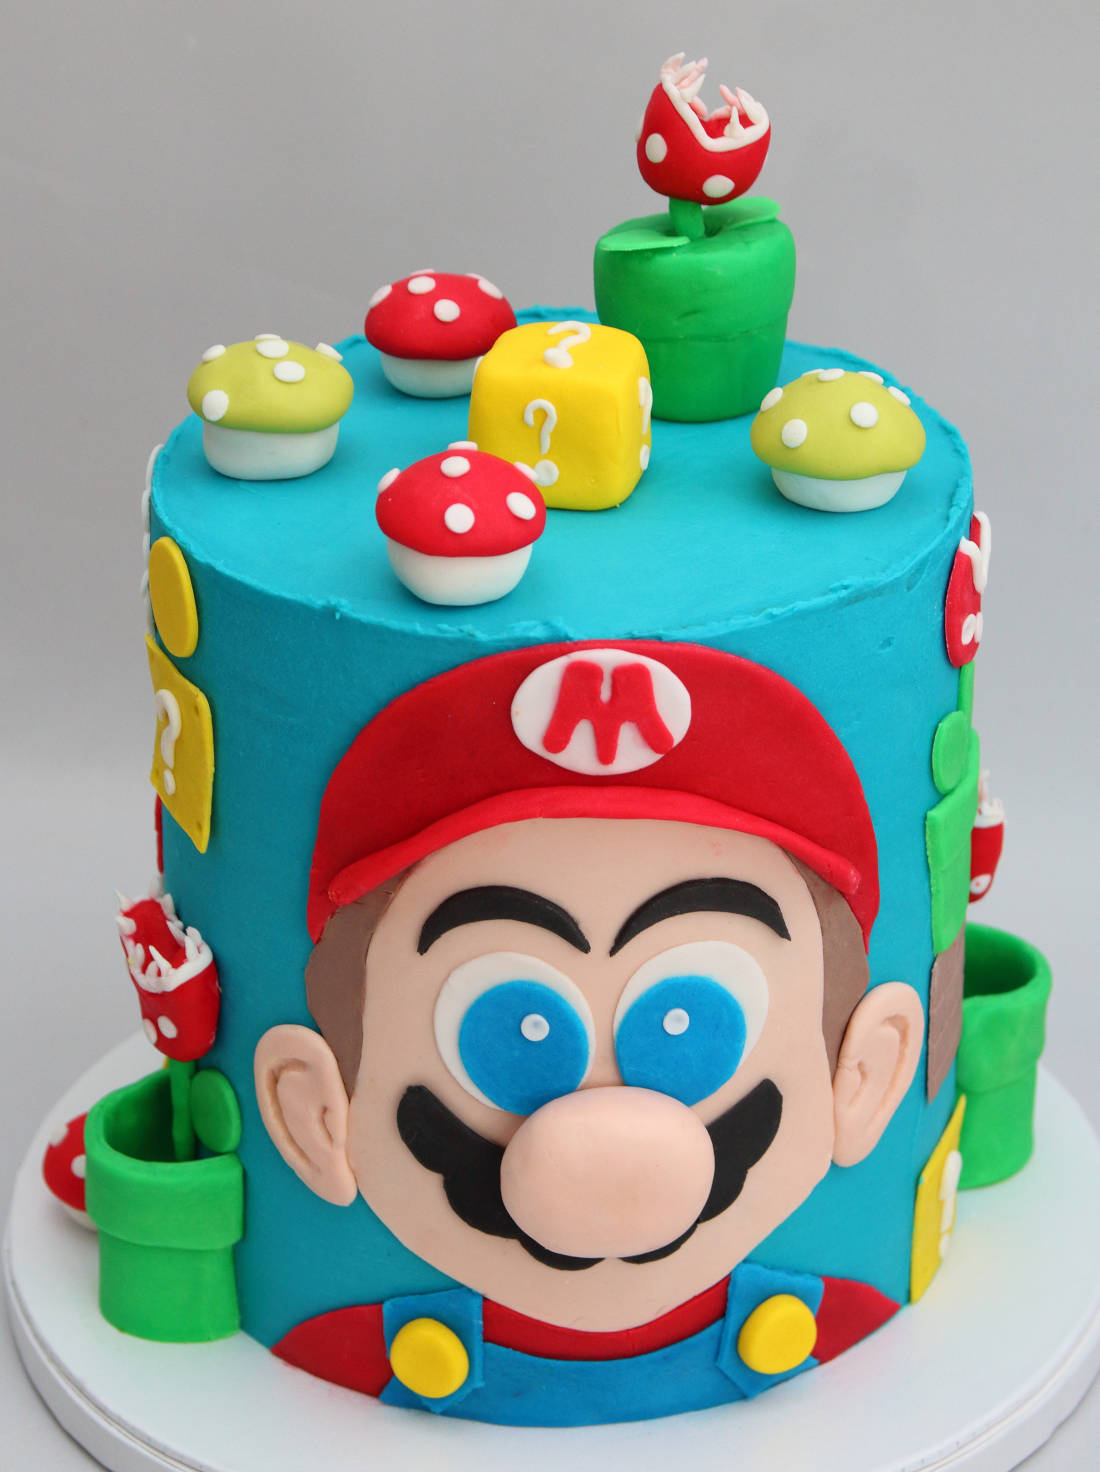 Delicious Mario cake for boys and girls birthday